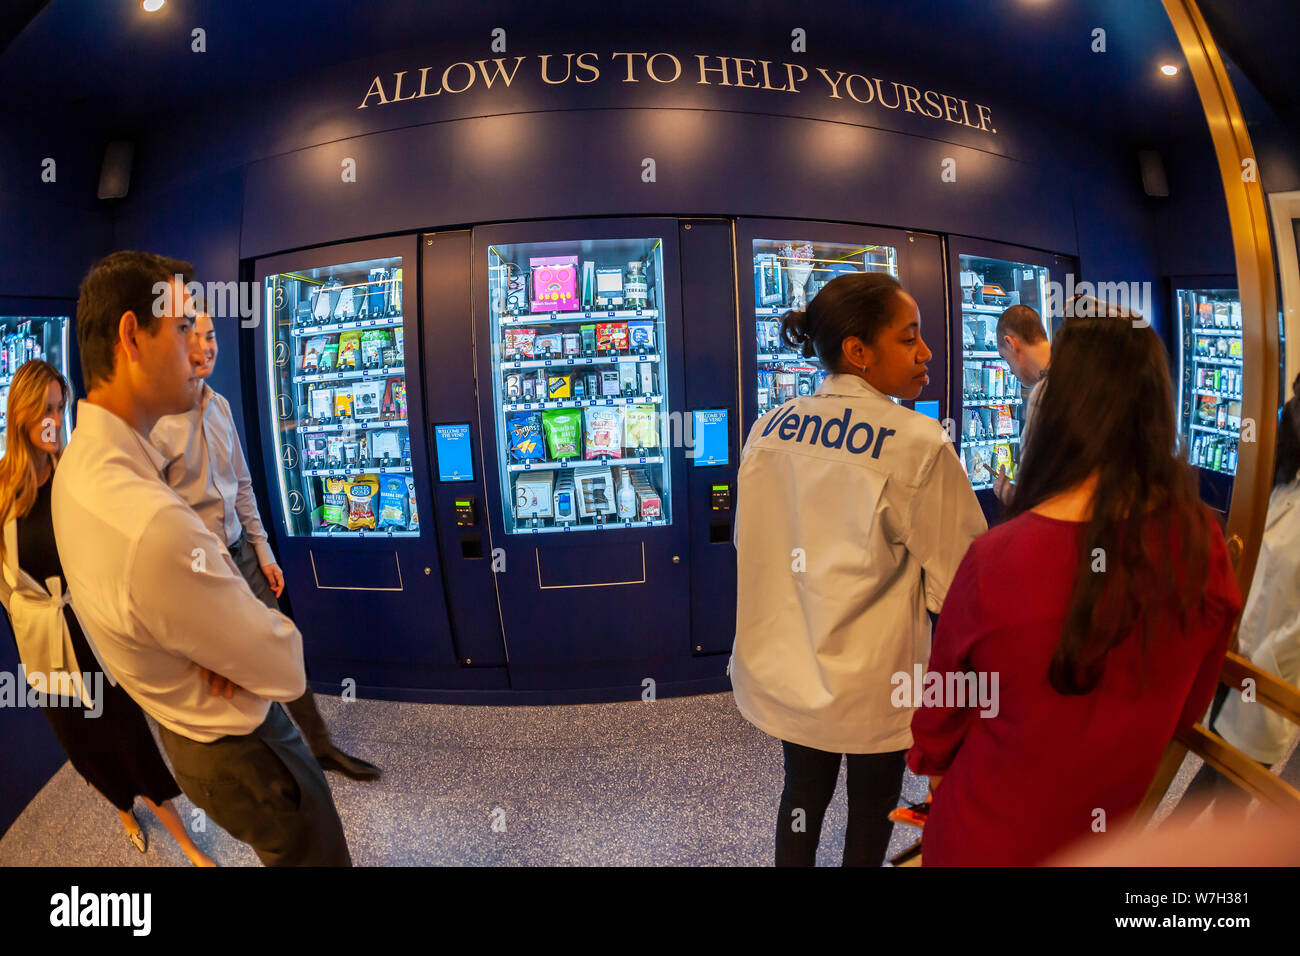 “The Vend” in Rockefeller Center in New York on its opening day, Tuesday, July 30, 2019. A product of Tishman-Speyer, the owners of Rockefeller Center, “The Vend”, installed in a vacant storefront on The Concourse, contains multiple vending machines selling everything from drinks, to Brooks Brothers shirts to a diamond engagement ring. (© Richard B. Levine) Stock Photo